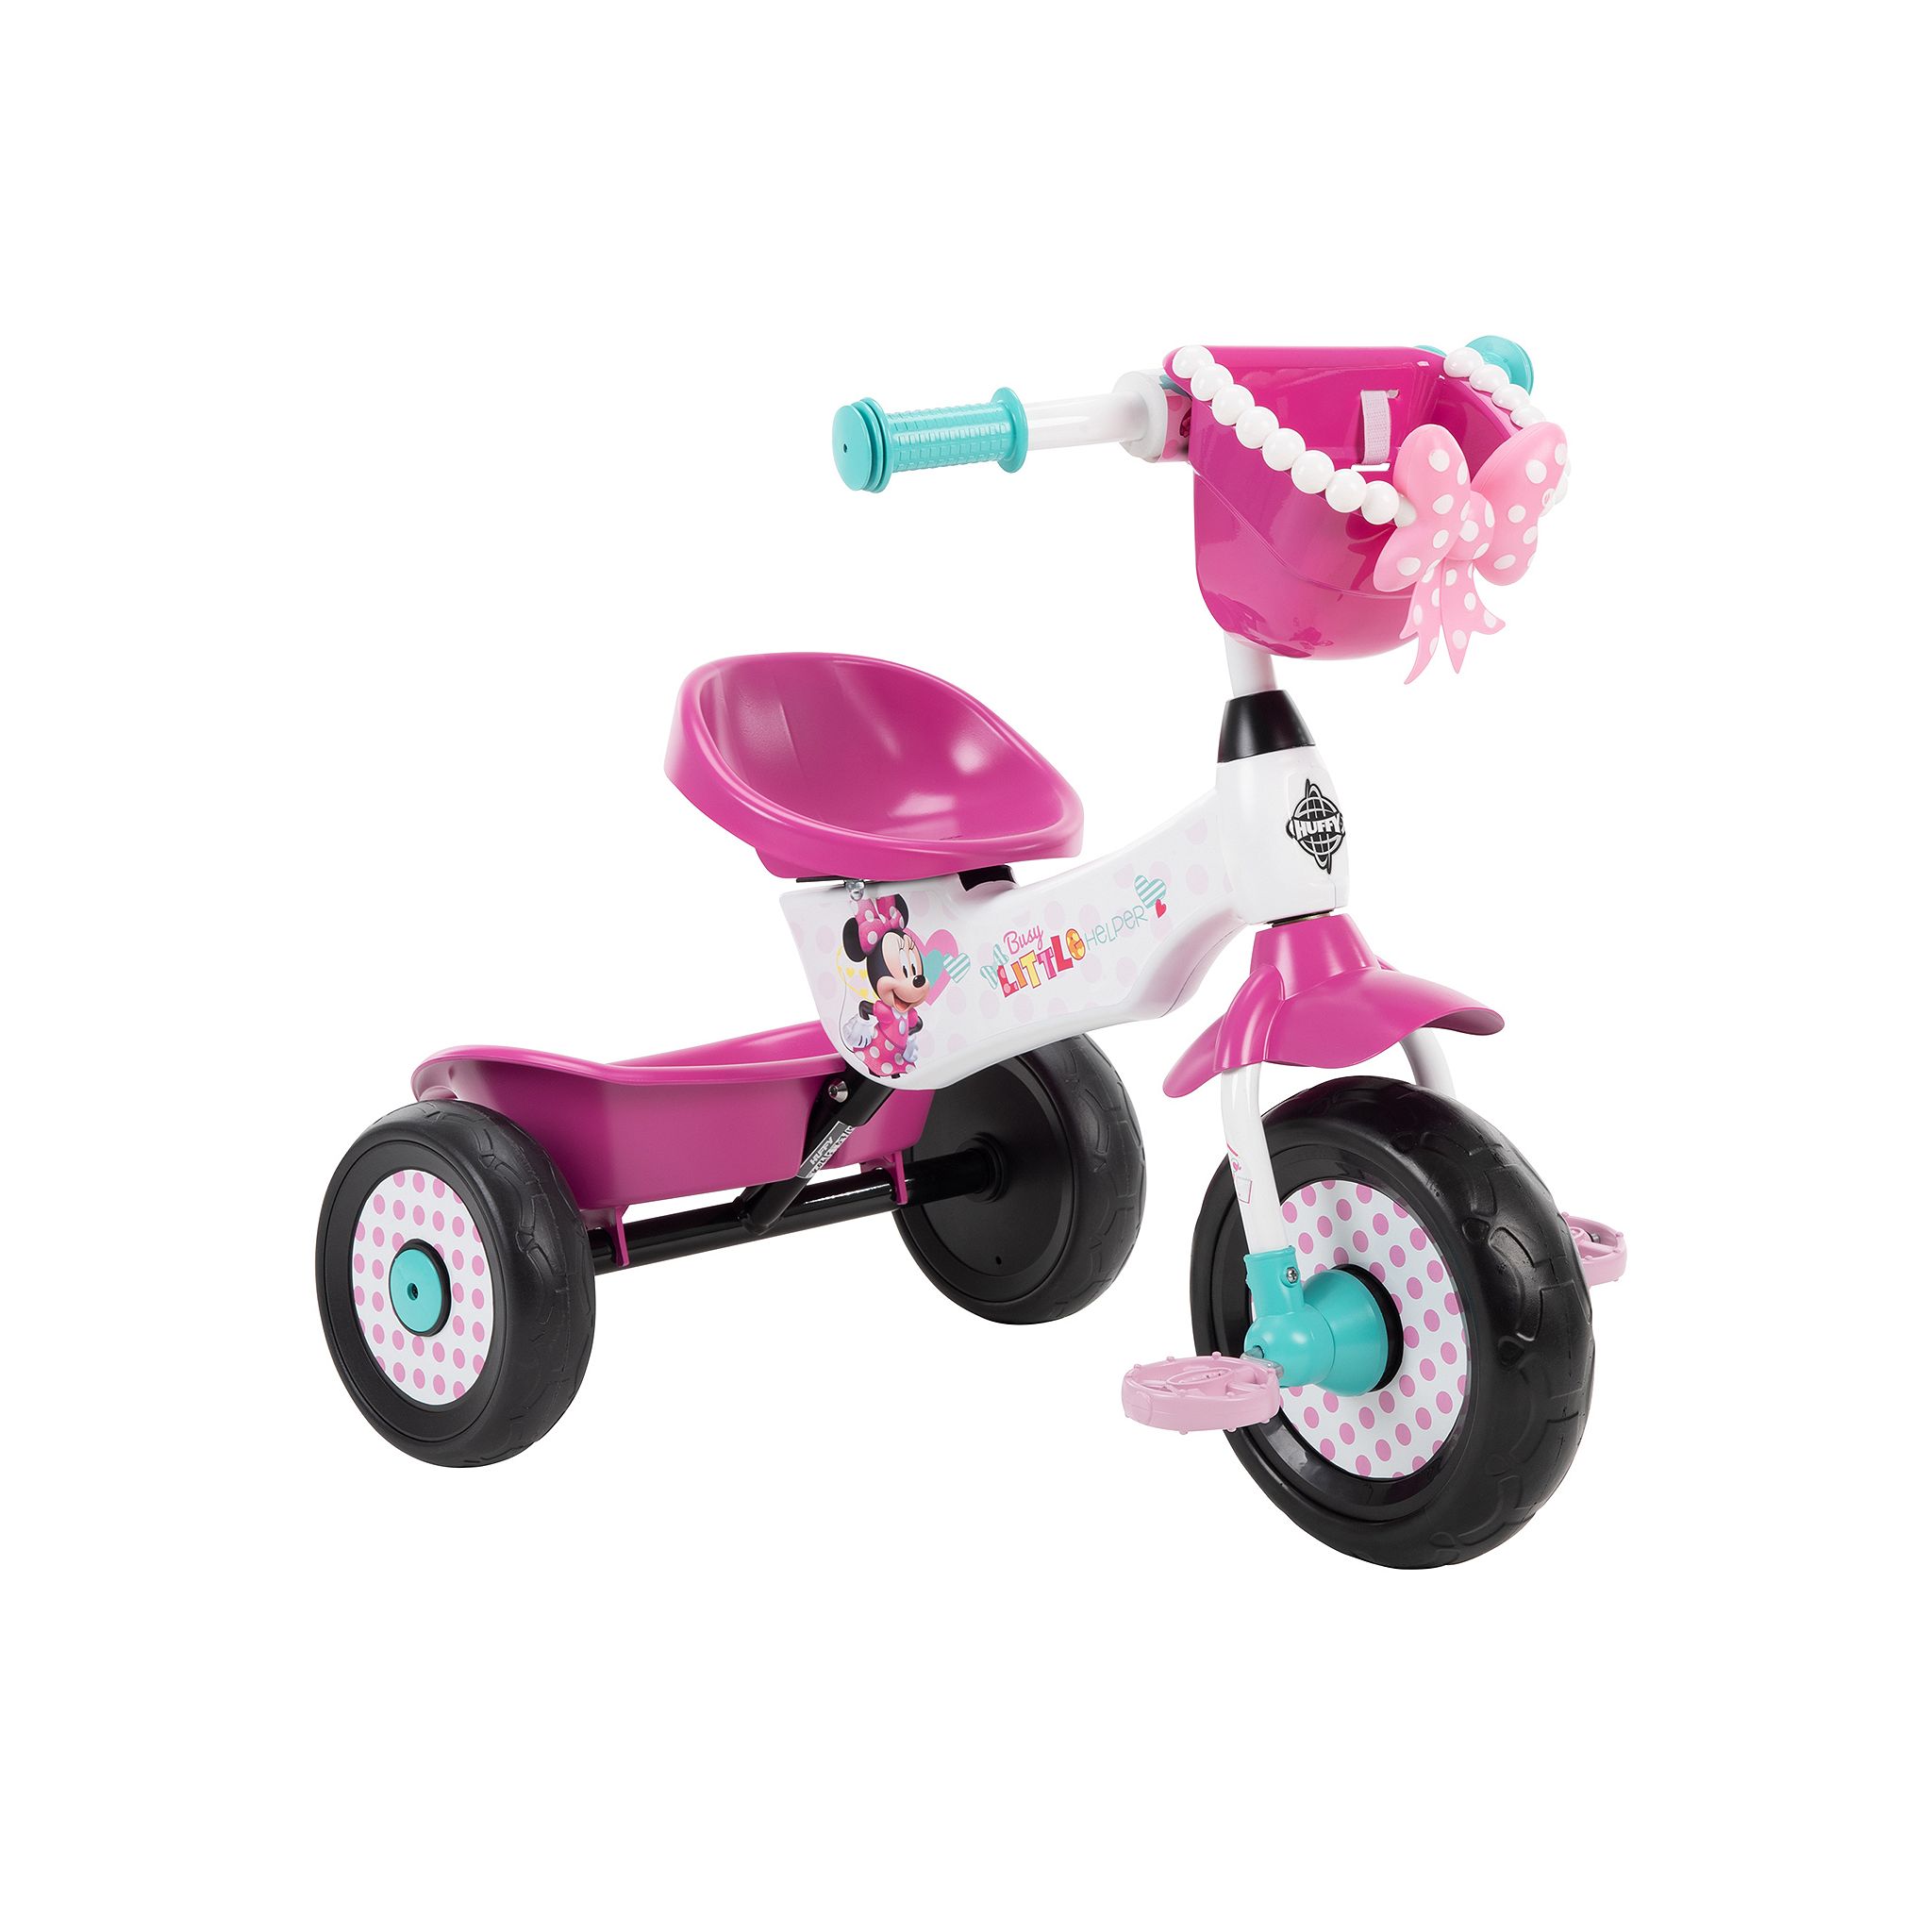 Kids Bikes: Shop Bicycles With Or Without Training Wheels | Kohl's